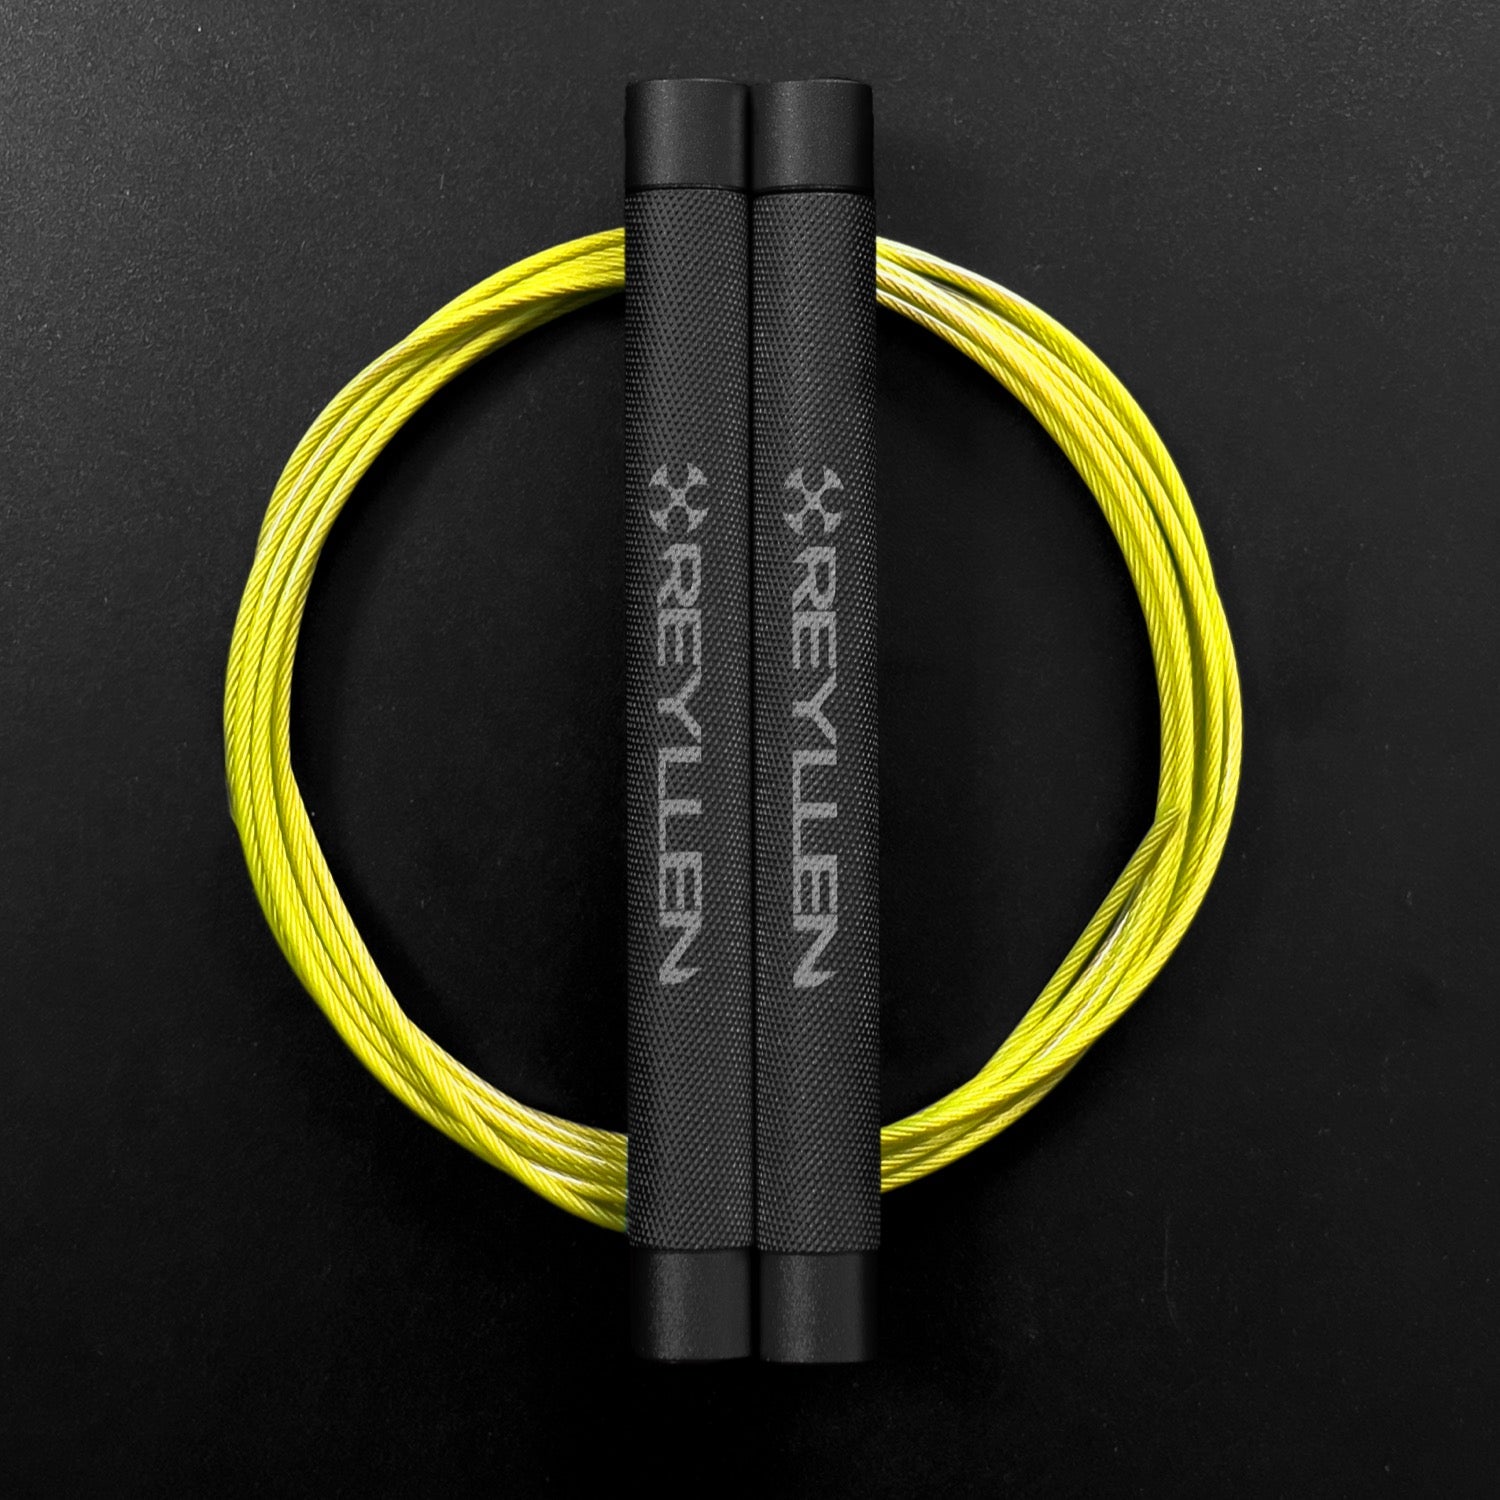 Reyllen Flare Mx Speed Skipping Jump Rope - Aluminium Handles - grey with yellow nylon coated cable